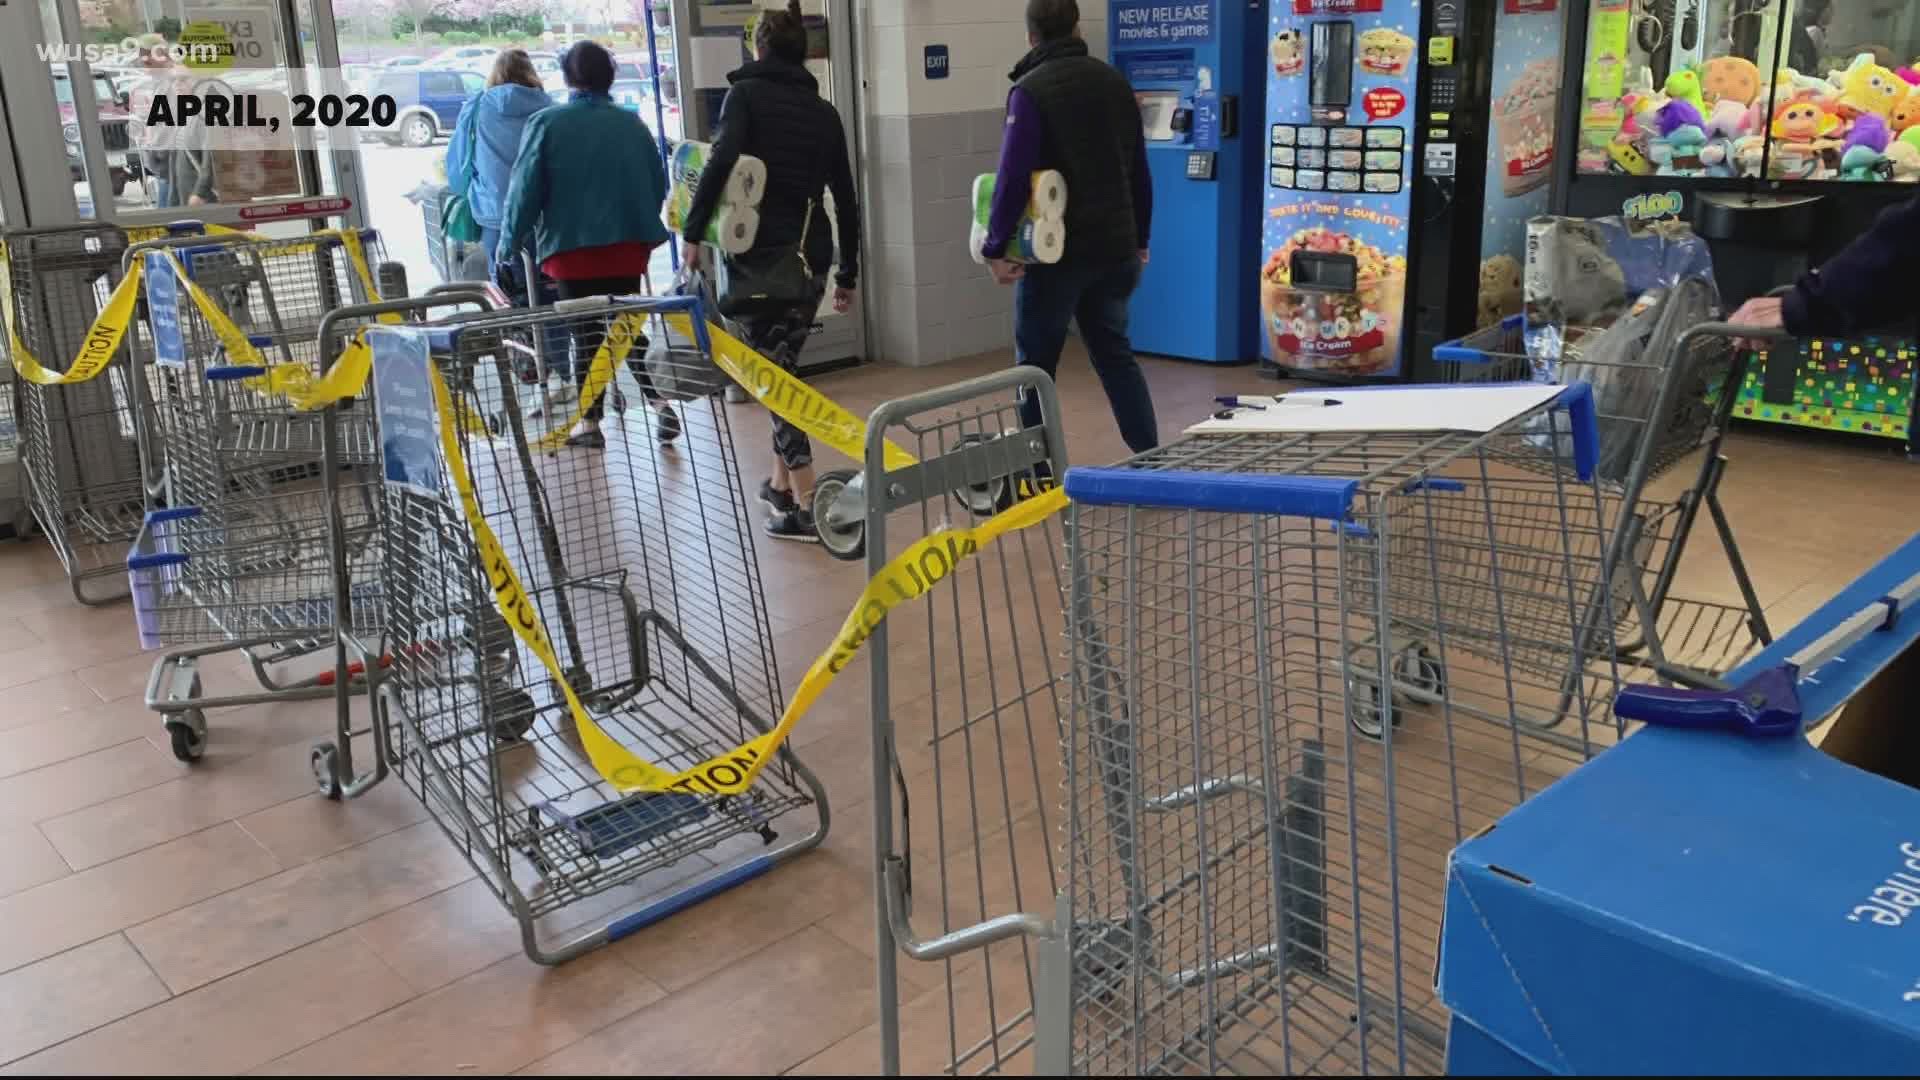 To reduce exposure to COVID, stores are limiting the number of customers. A viewer emailed us saying several grocery stores in MD and VA were obstructing doors.